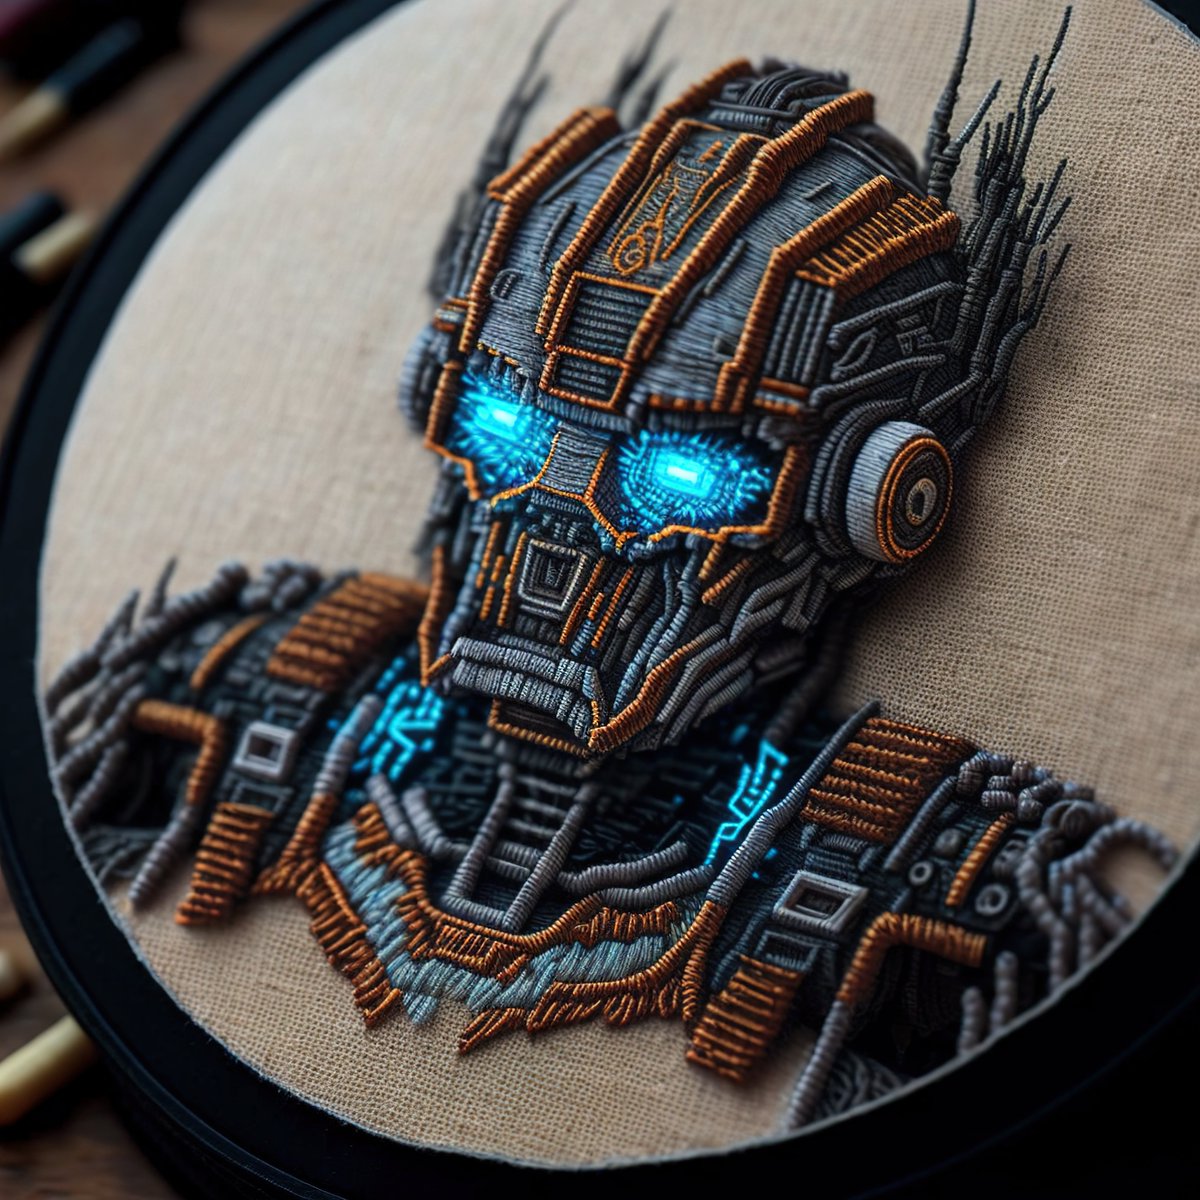 AI can create inspiration for embroidery templates 👀 I will be recreating some of my favorites in physical form when I get some time next year ❤️‍🔥 #AI #embroidery #robot